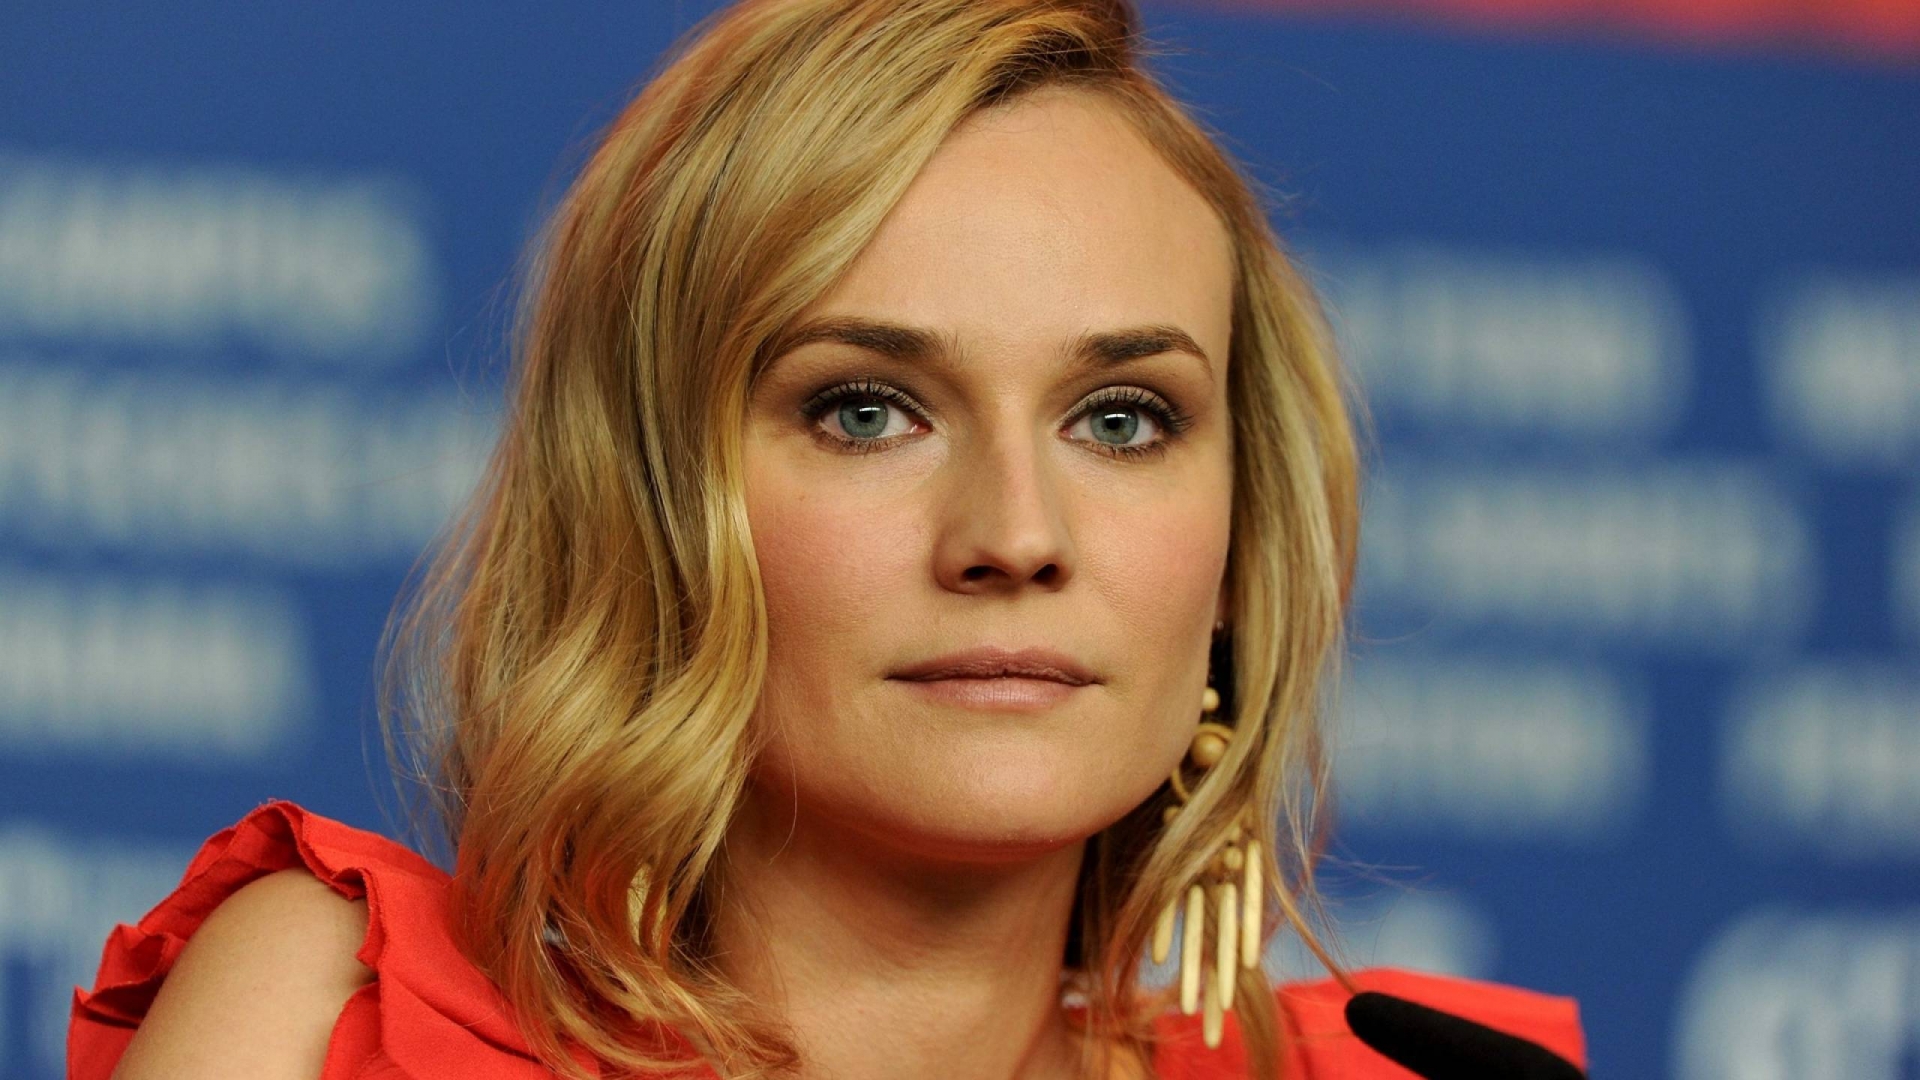 Beautiful Diane Kruger for 1920 x 1080 HDTV 1080p resolution